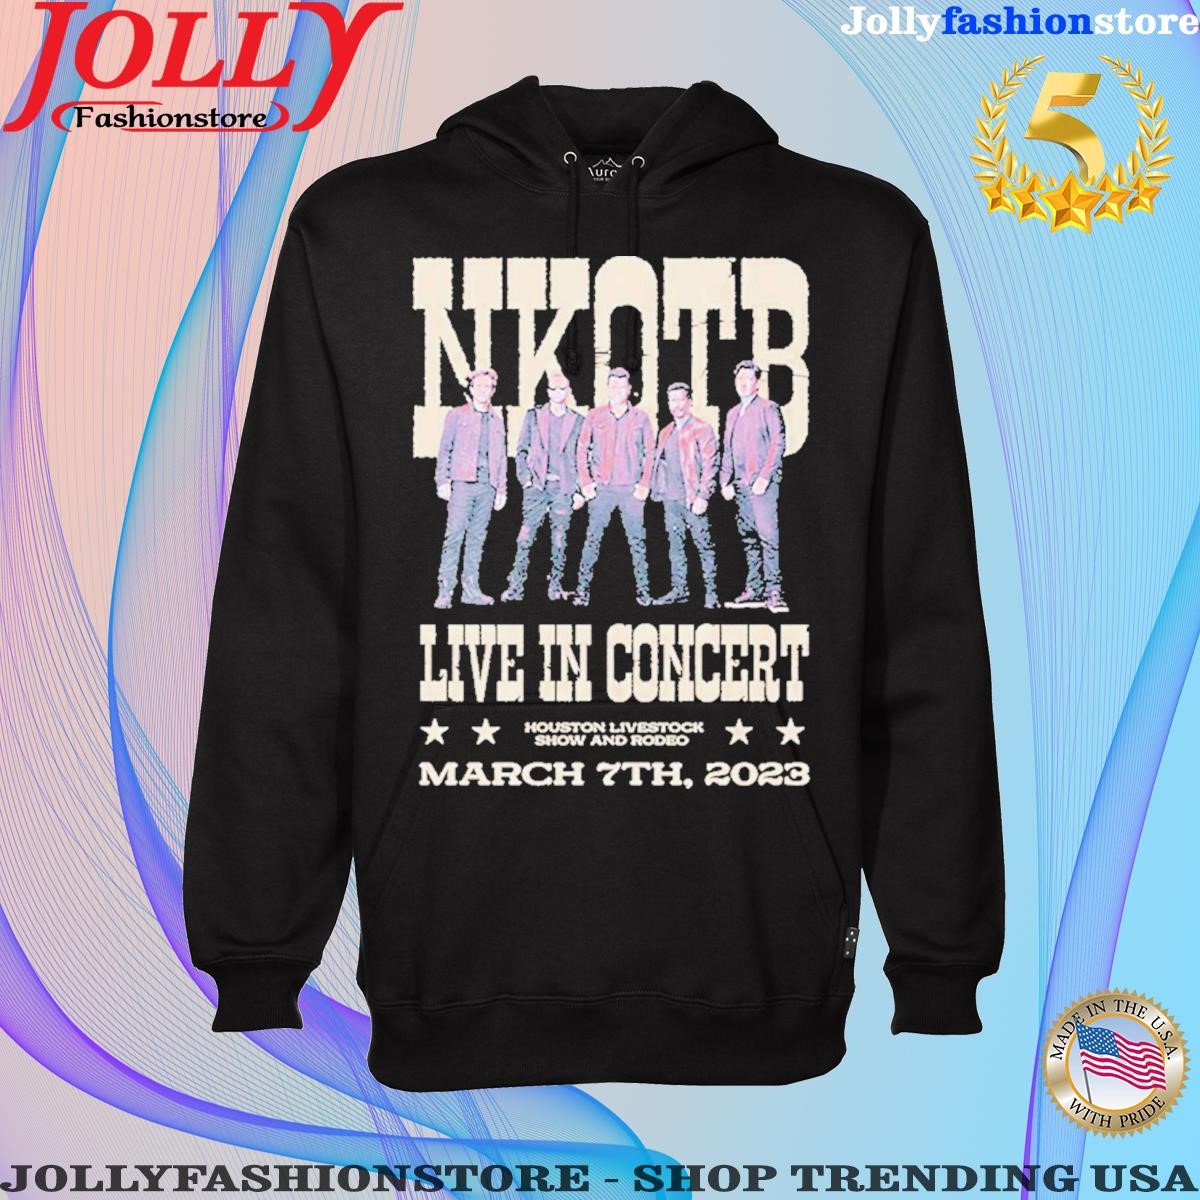 Nkotb live in concert houston livestock show and rodeo march 7th 2023 shirt Hoodie shirt.png